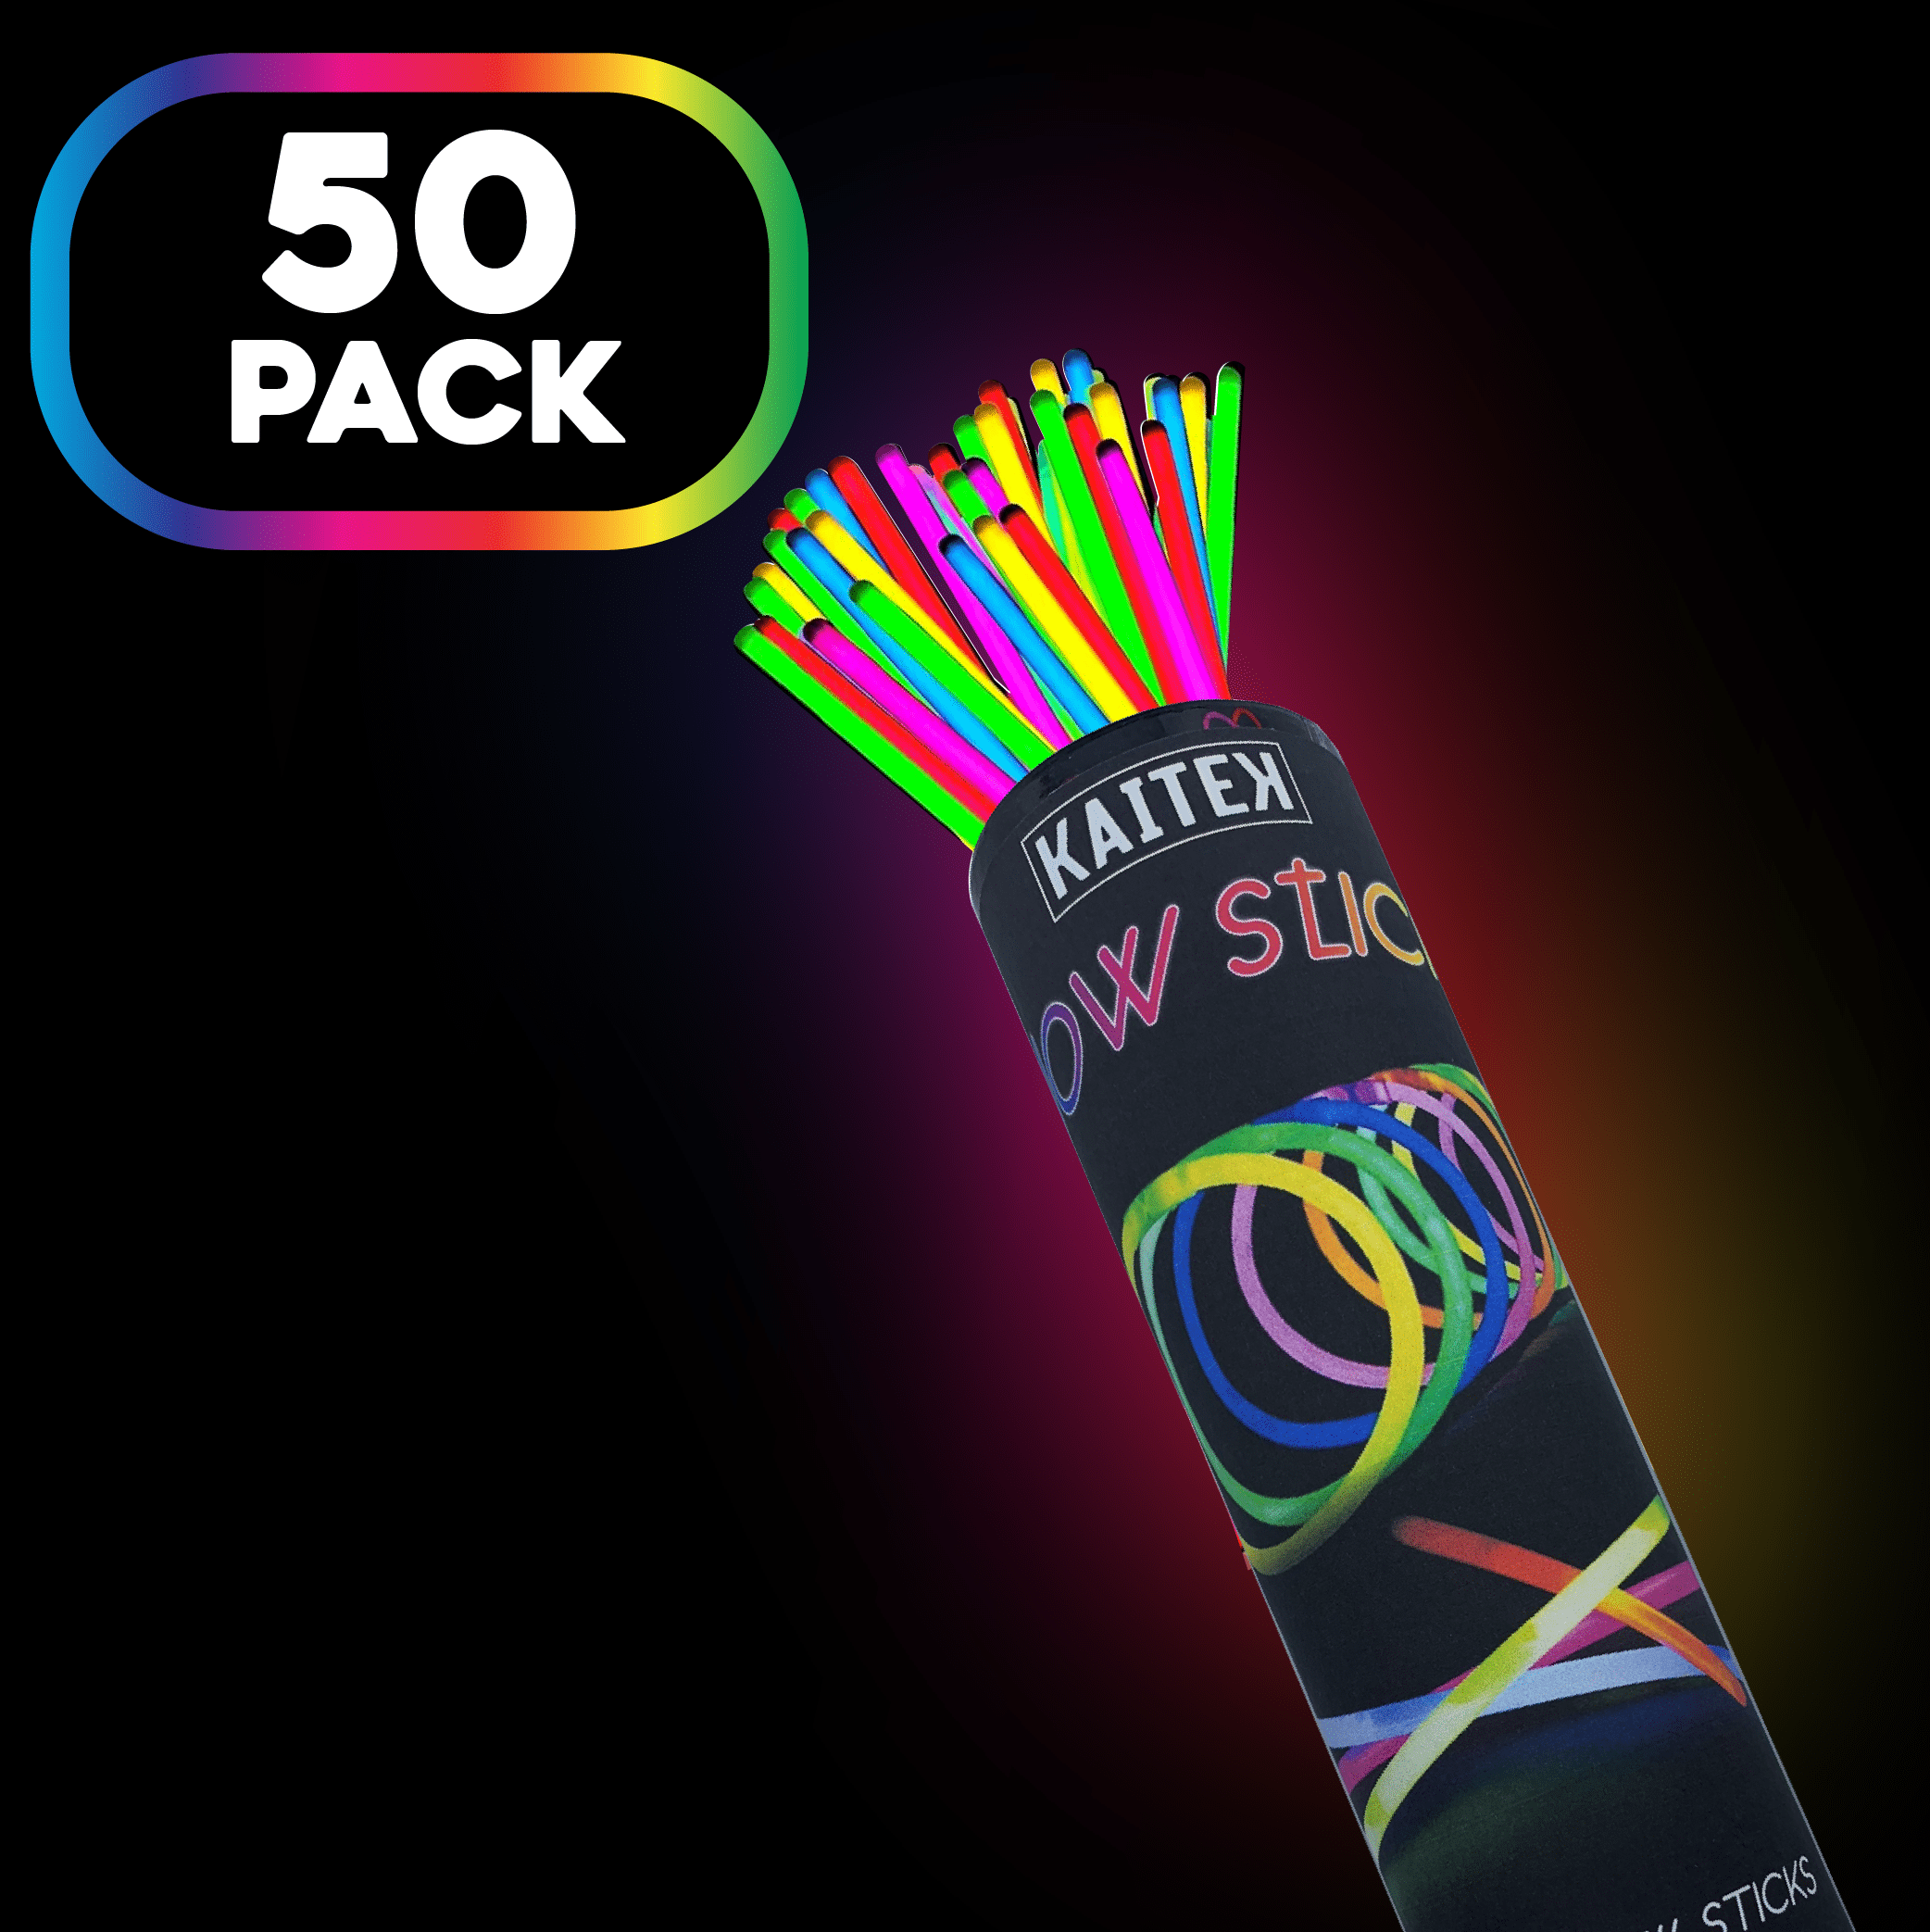 Kaitek Glow Stick Party Favors for Halloween Neon Theme Party Glow in the Dark  Party Combo pack (Pack of 448 pcs) 